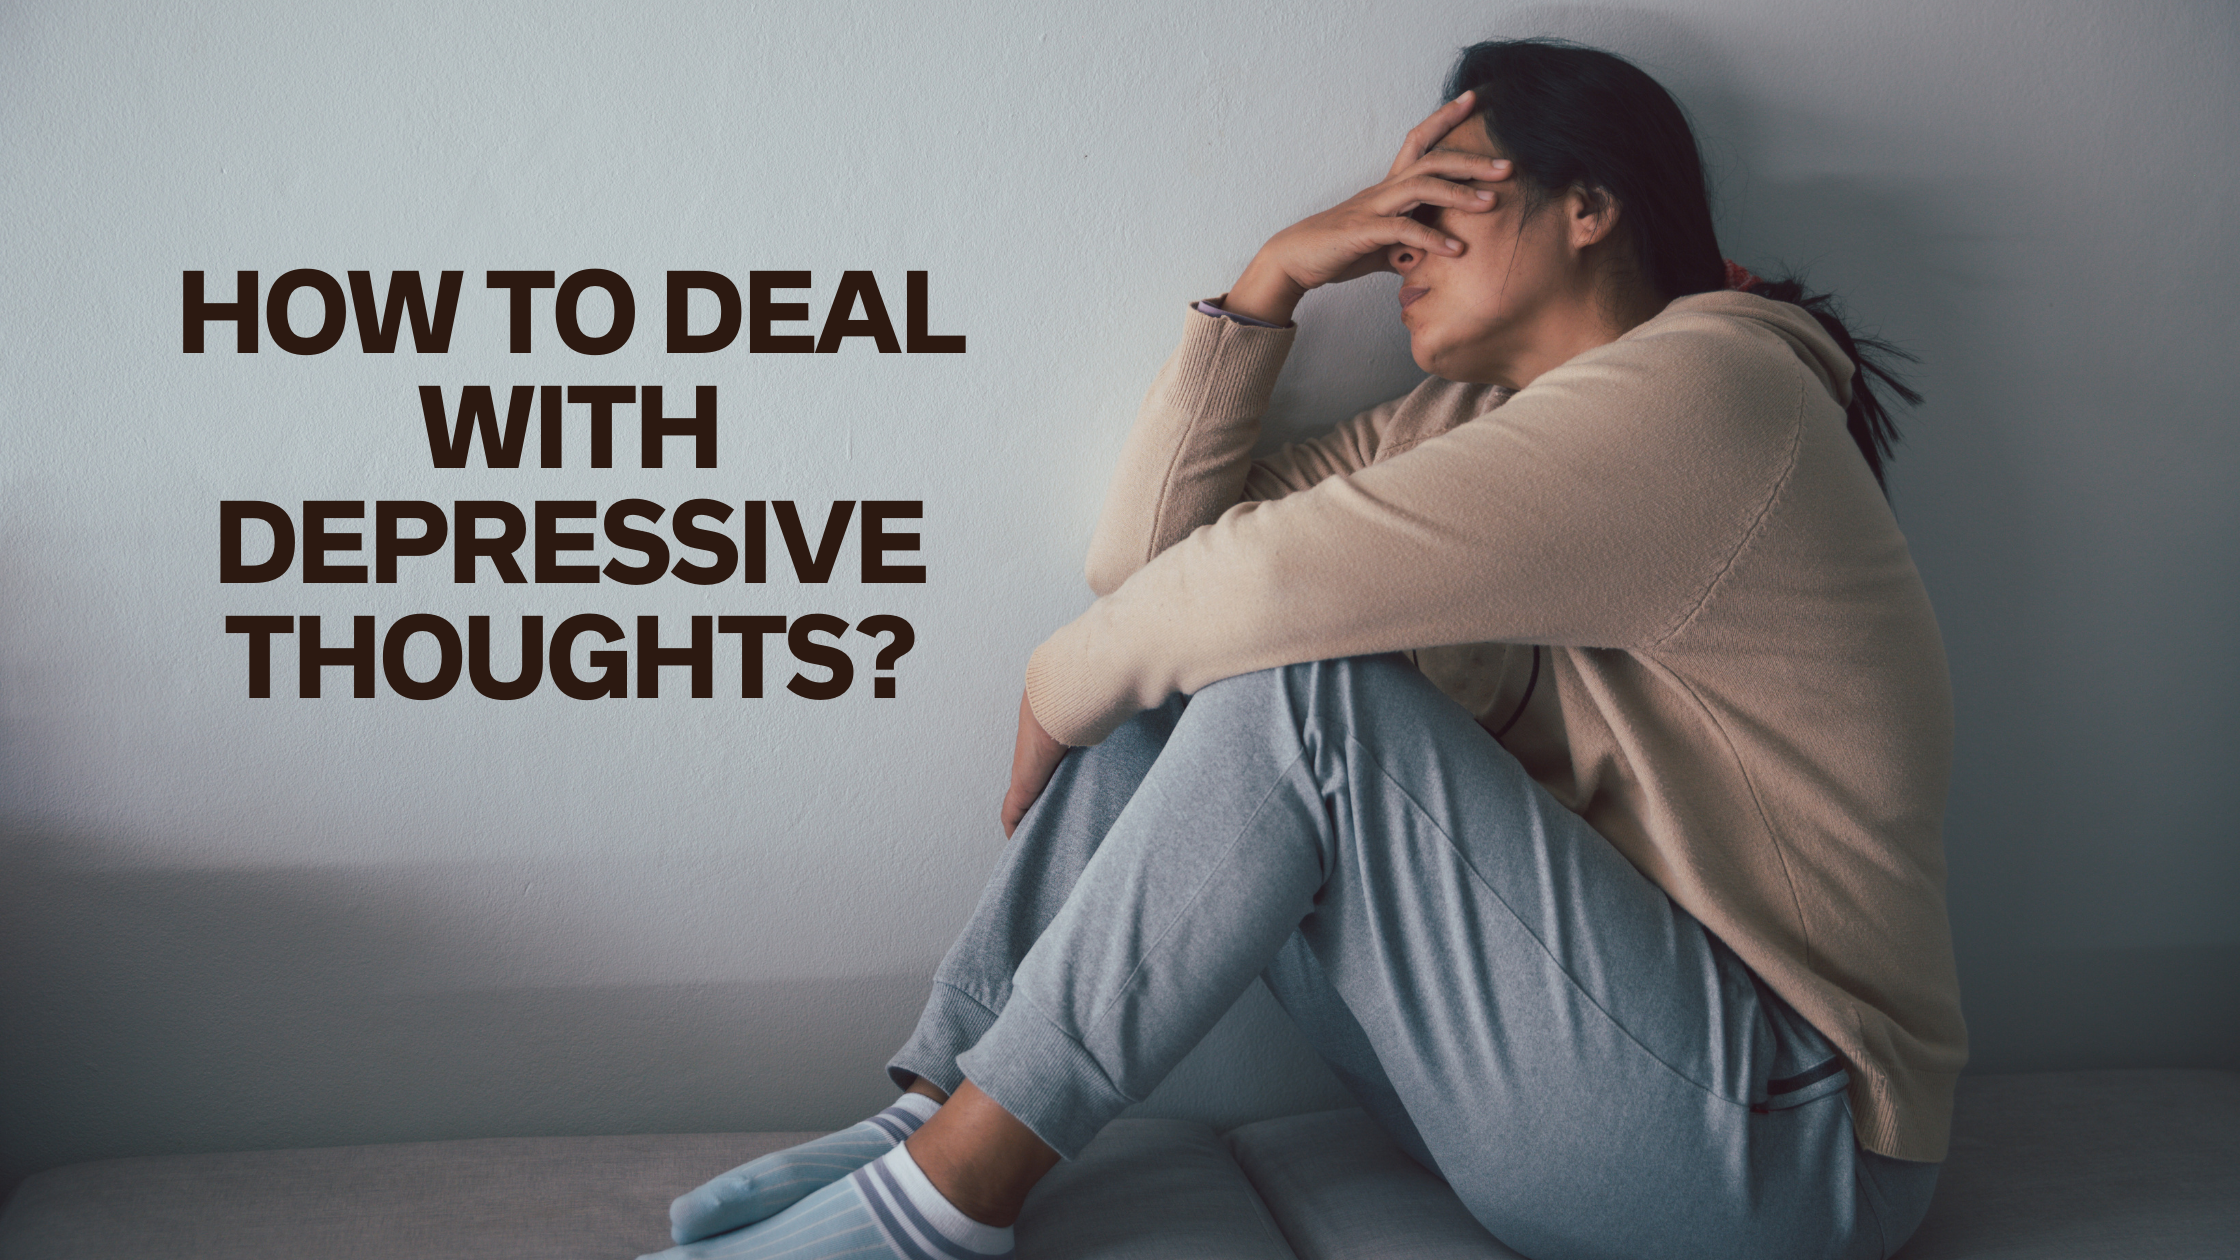 How to Deal With Depressive Thoughts